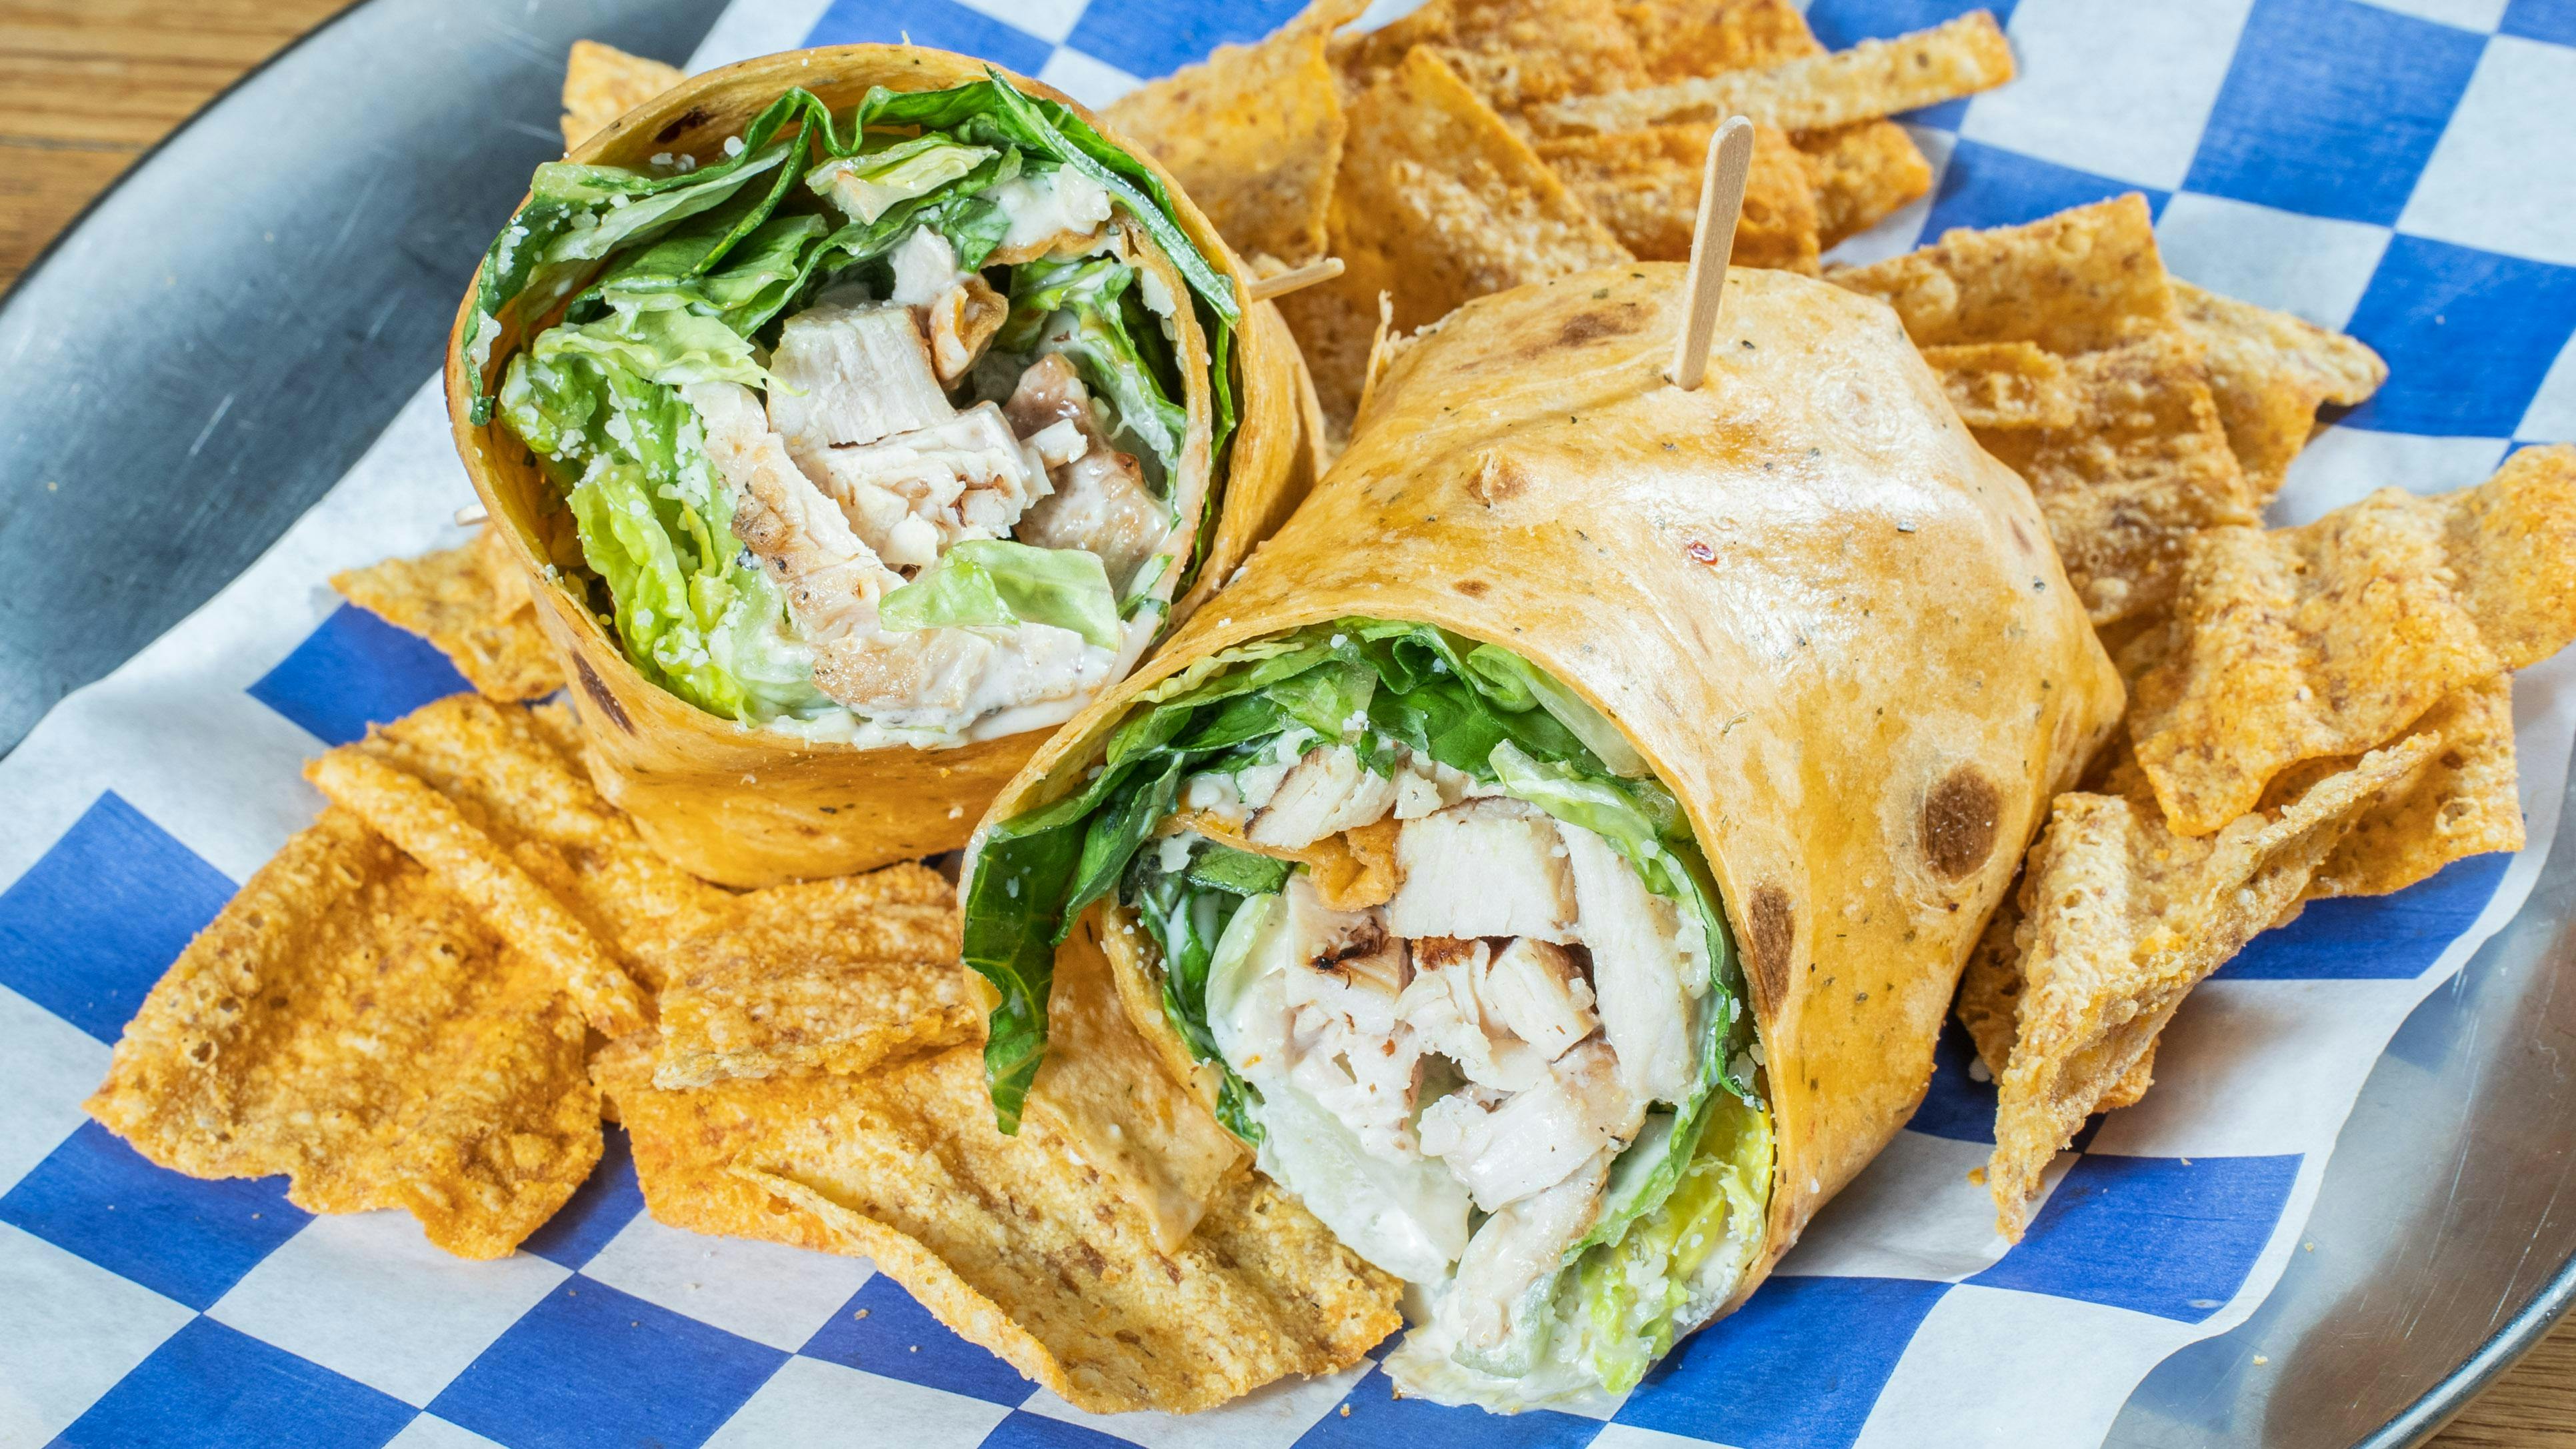 Chicken Caesar Wrap from Austin Salad Company - East 6th St in Austin, TX